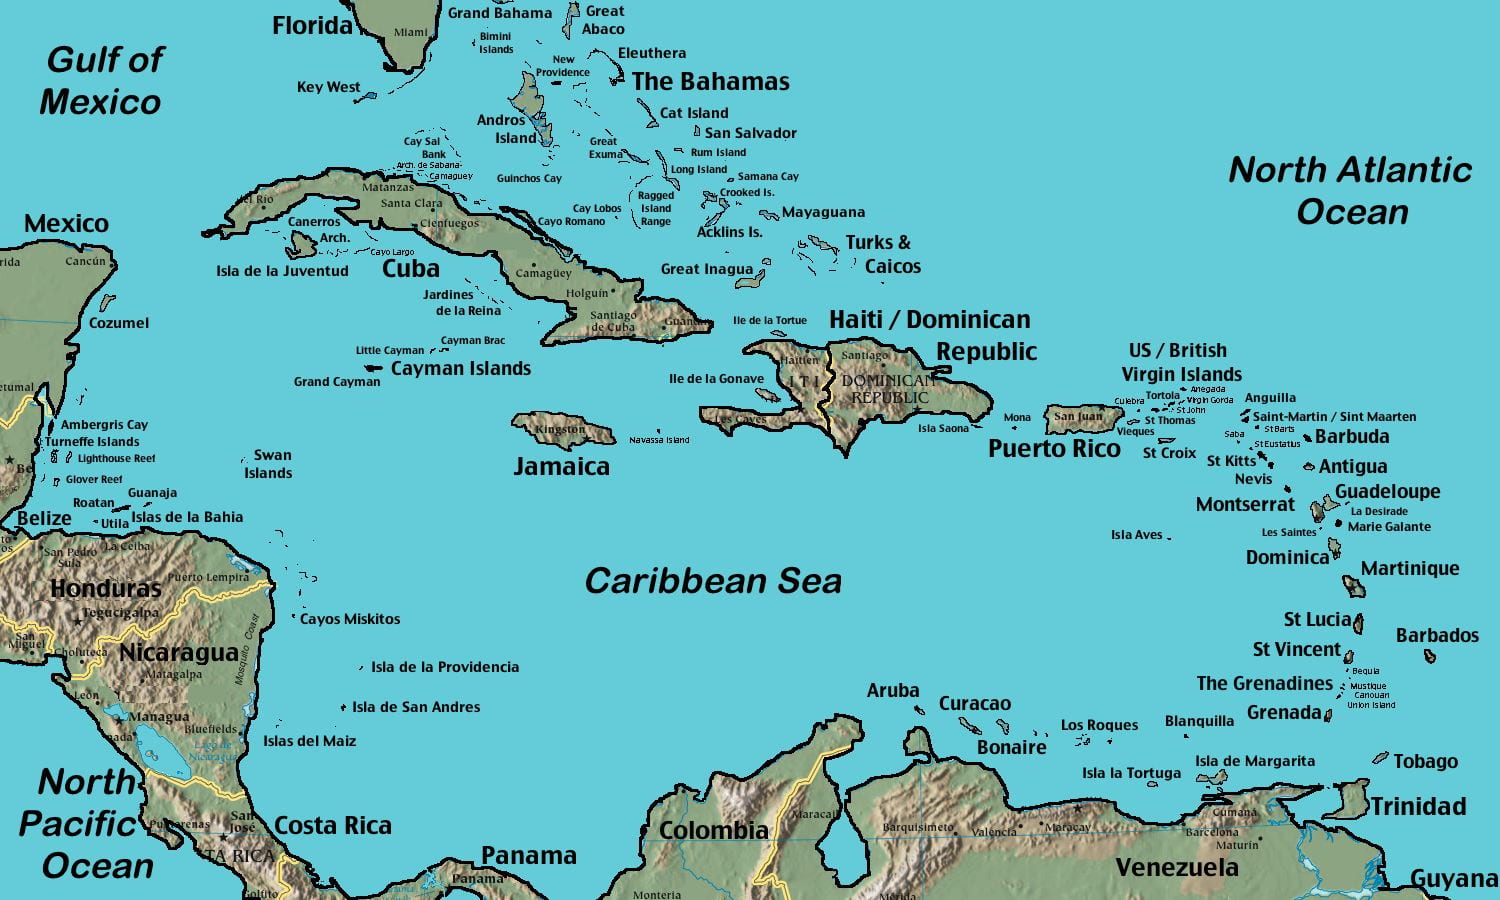 A map of the Caribbean region that depicts a large number of small islands.